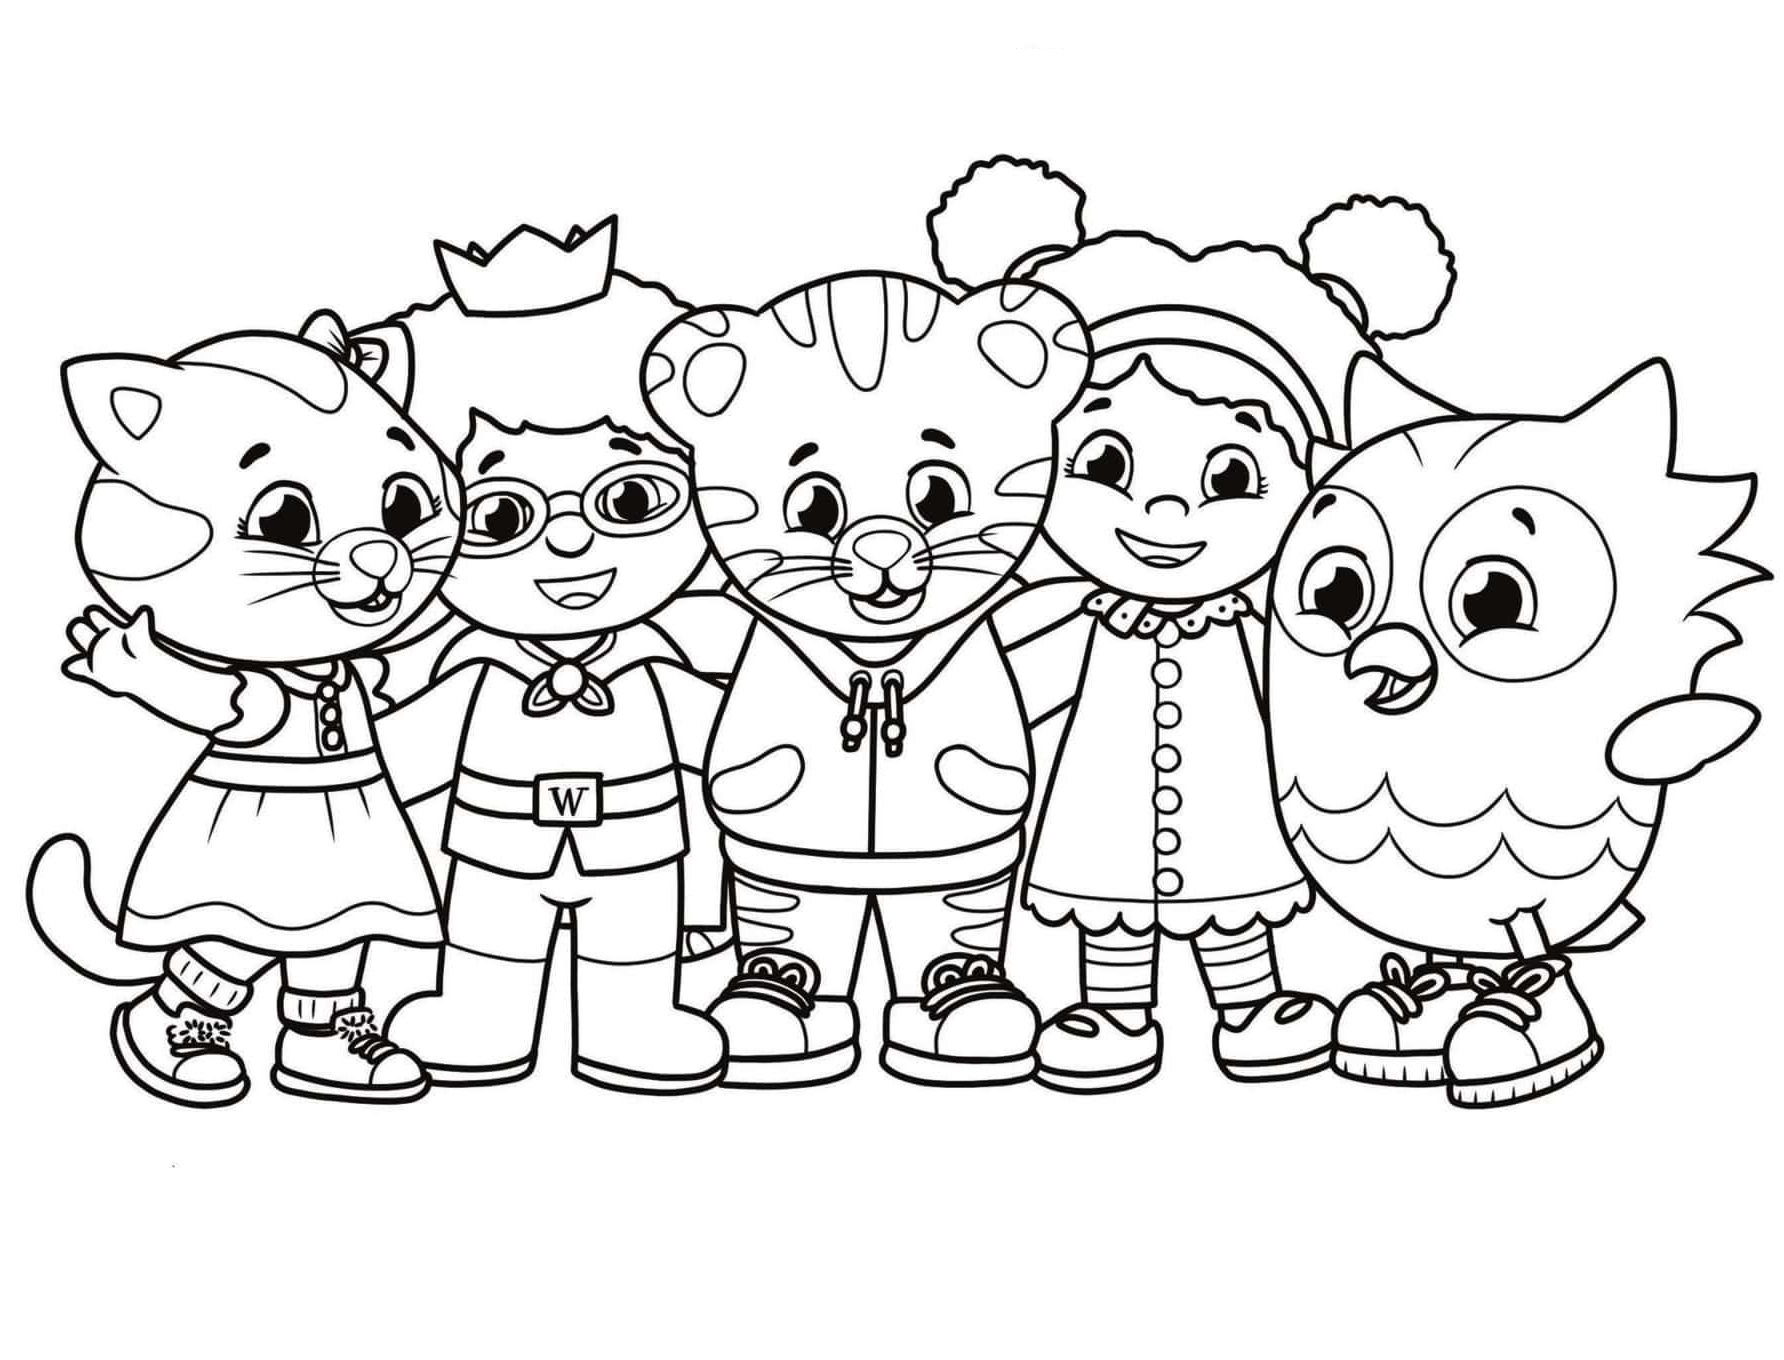 Be My Neighbor Daniel Tiger Coloring Page Free Printable Coloring